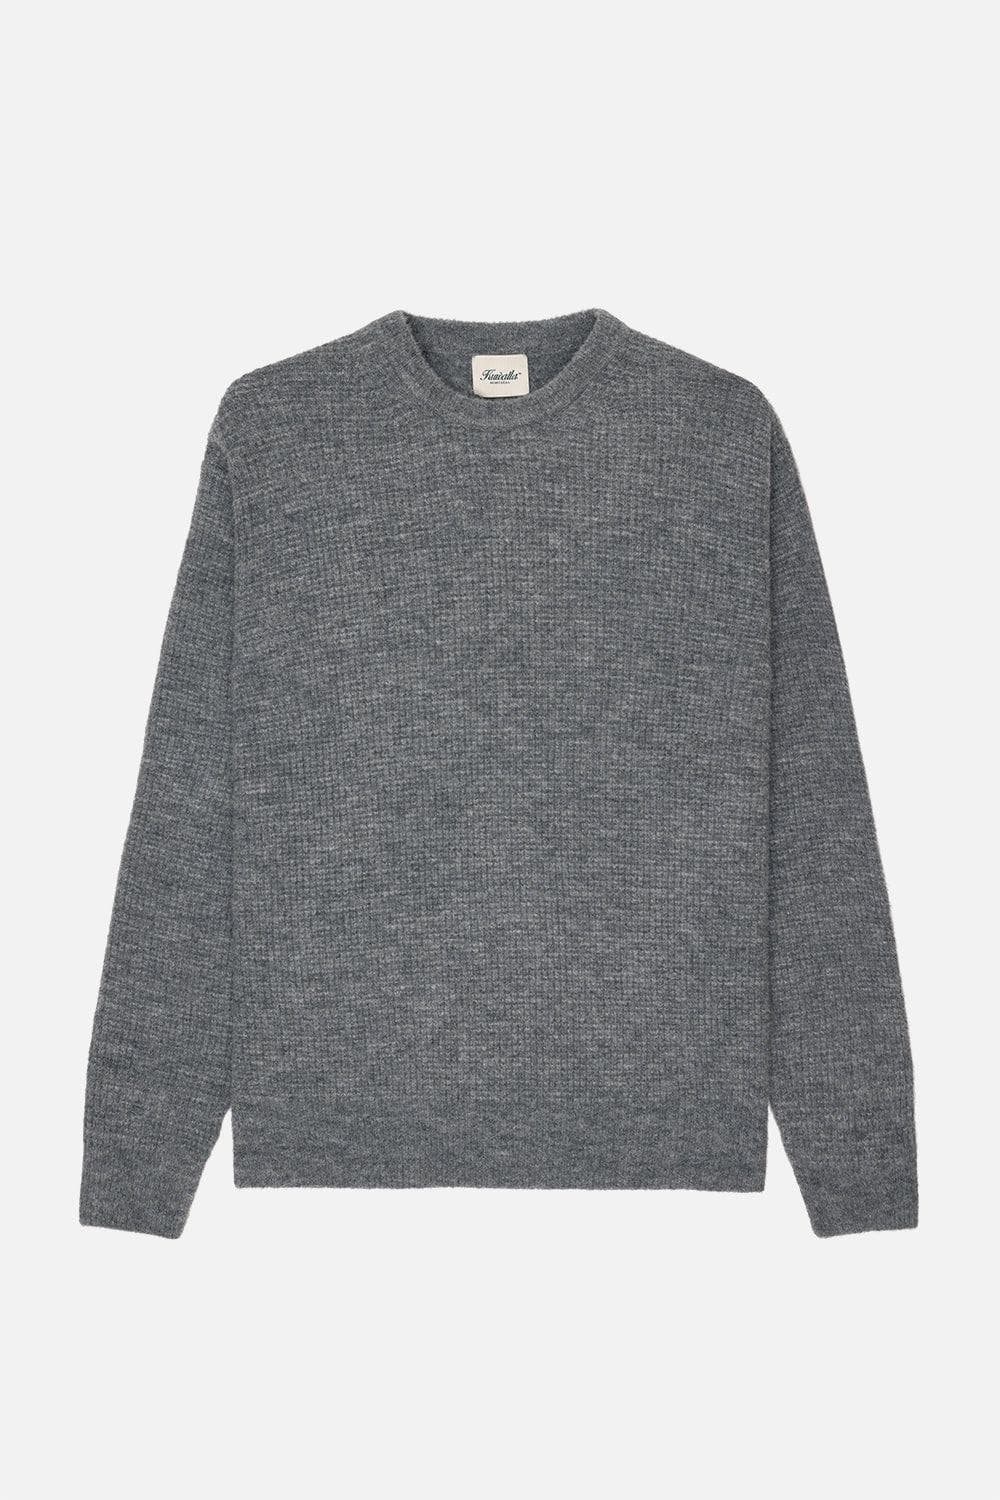 Brushed Knit Crew